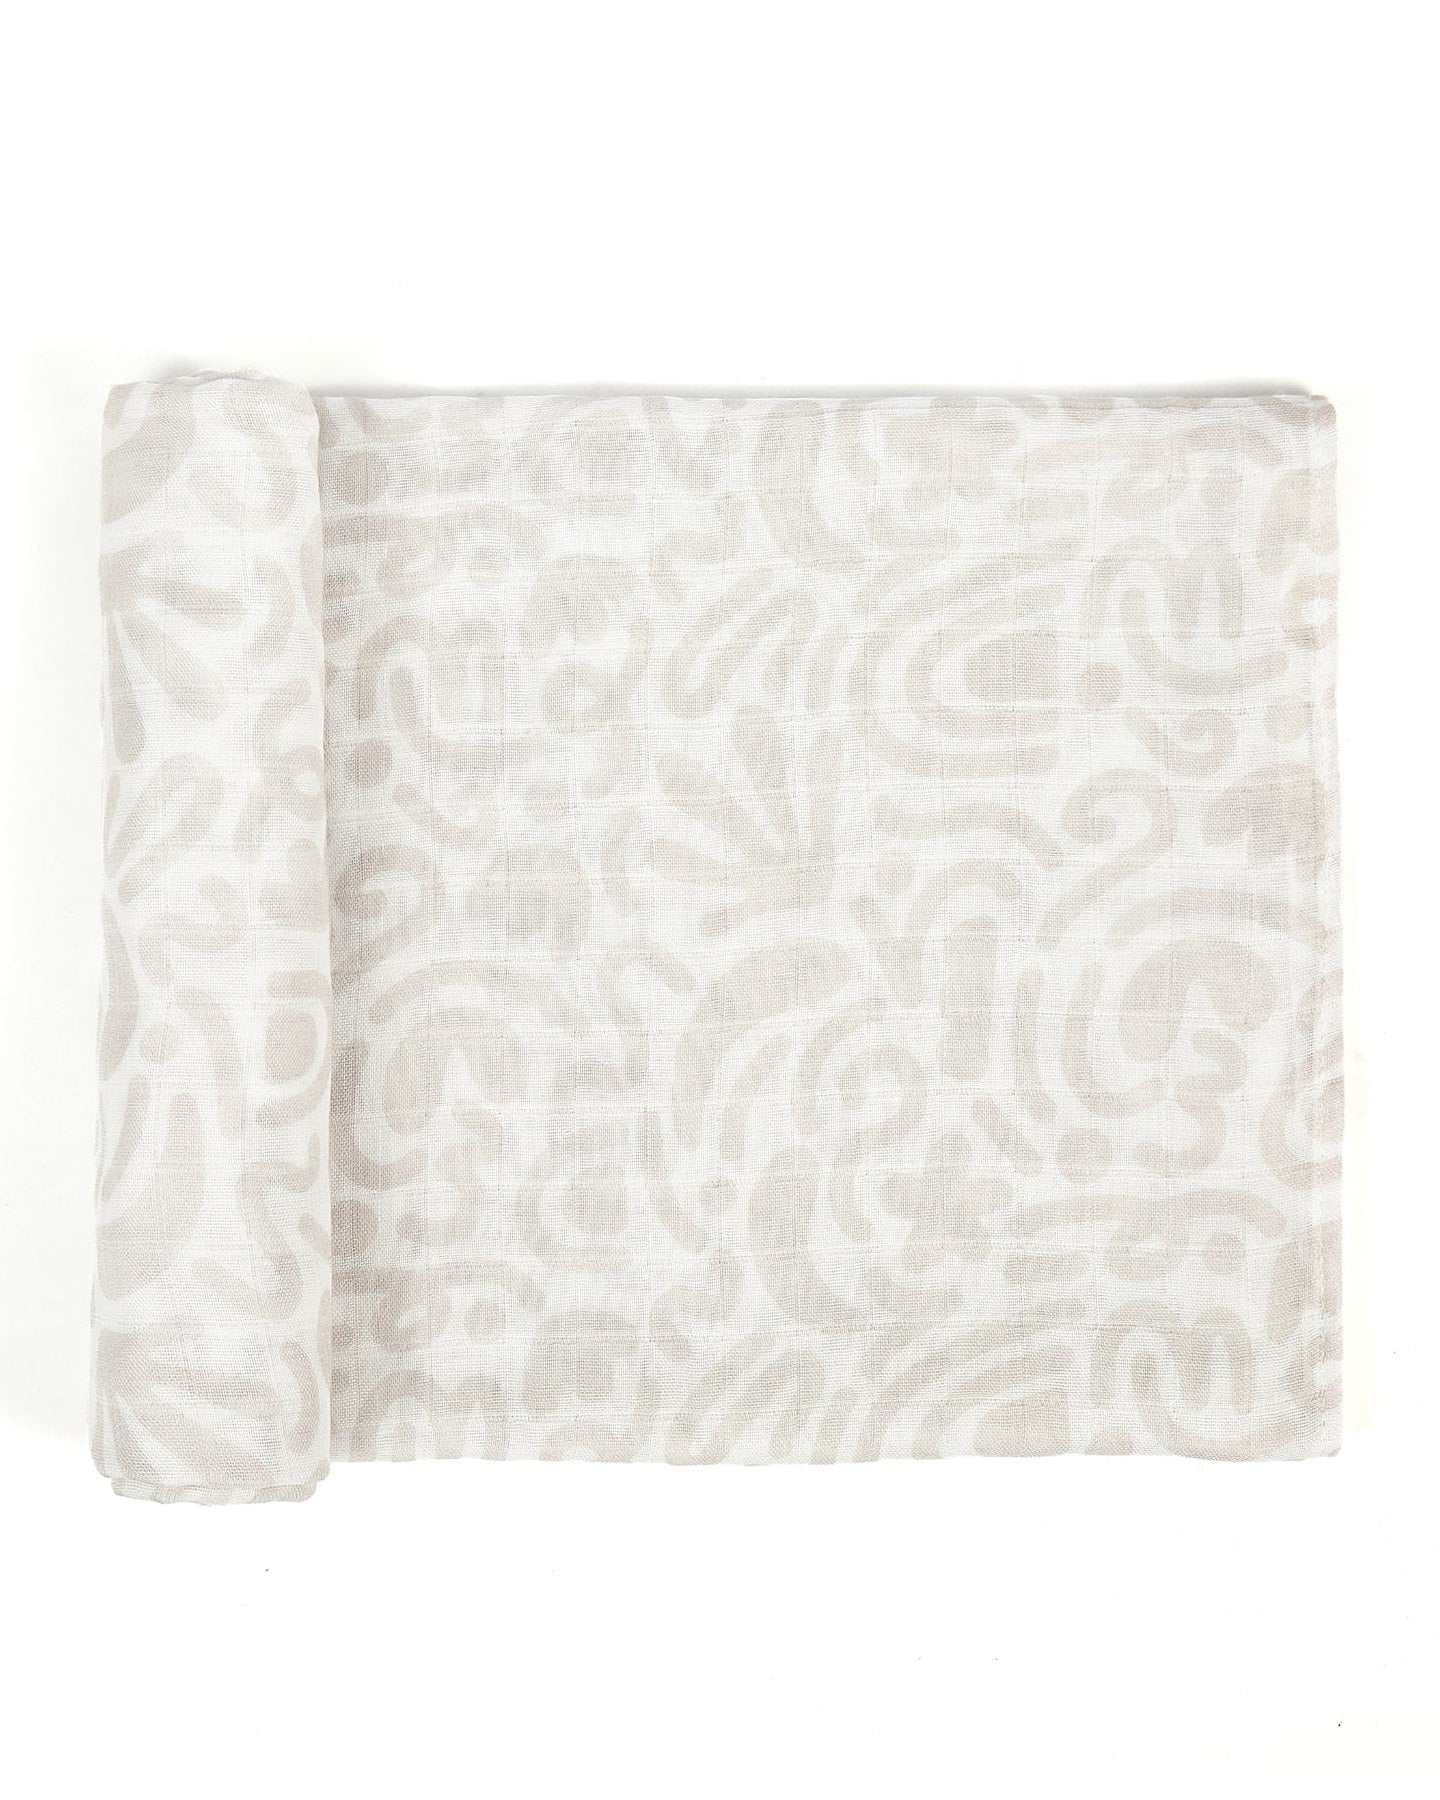 Vanilla Swirl Swaddle - Baby Swaddles at Louie Meets Lola